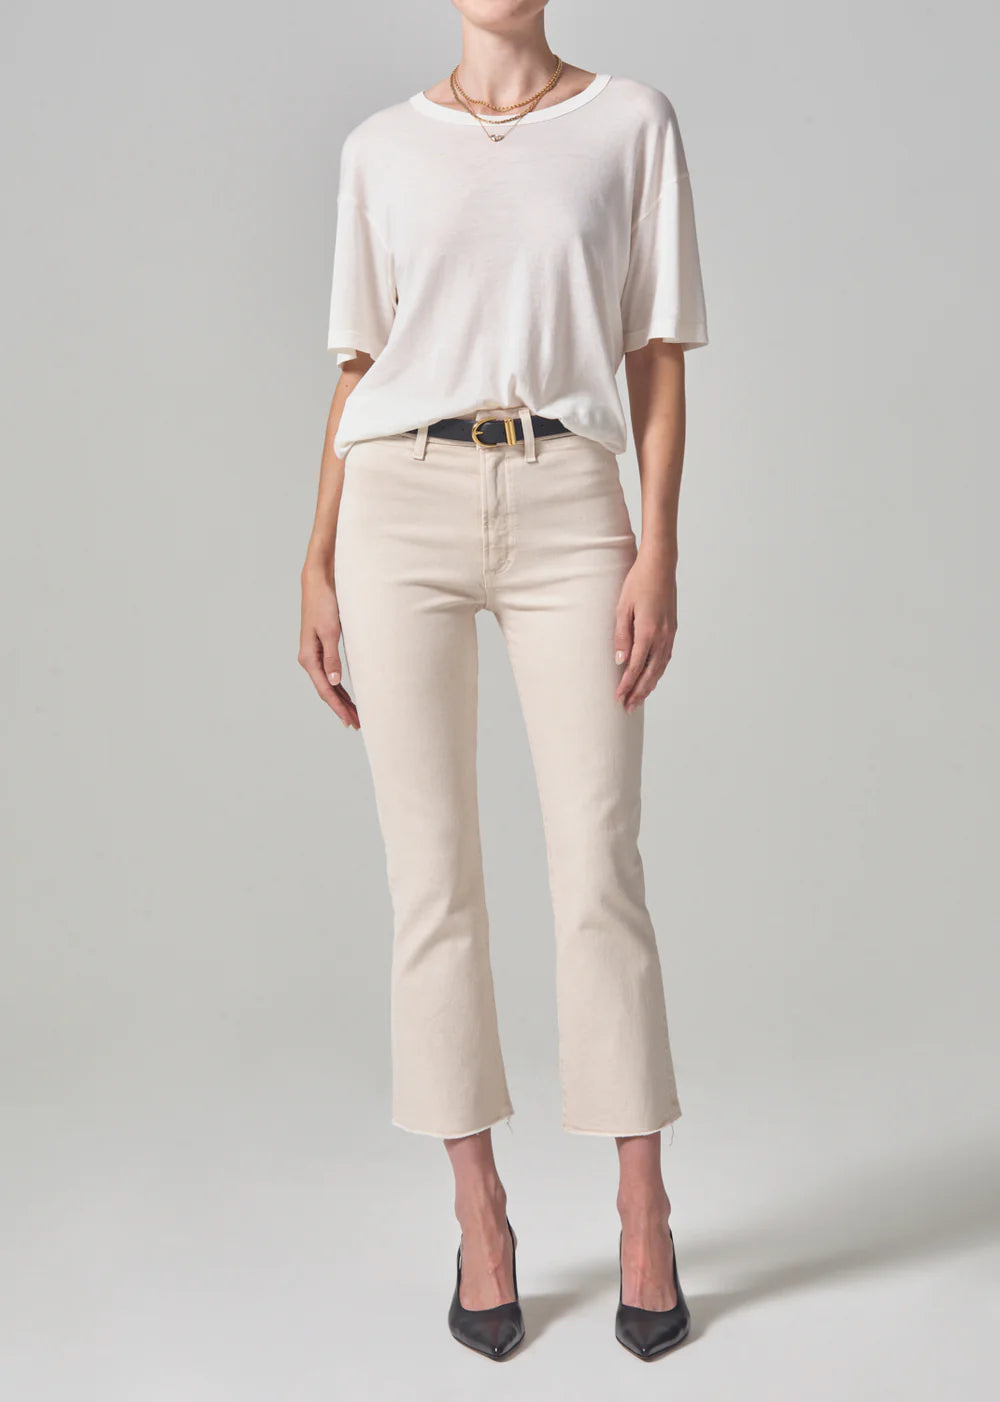 Citizens of Humanity Isola Cropped Trouser Almondette